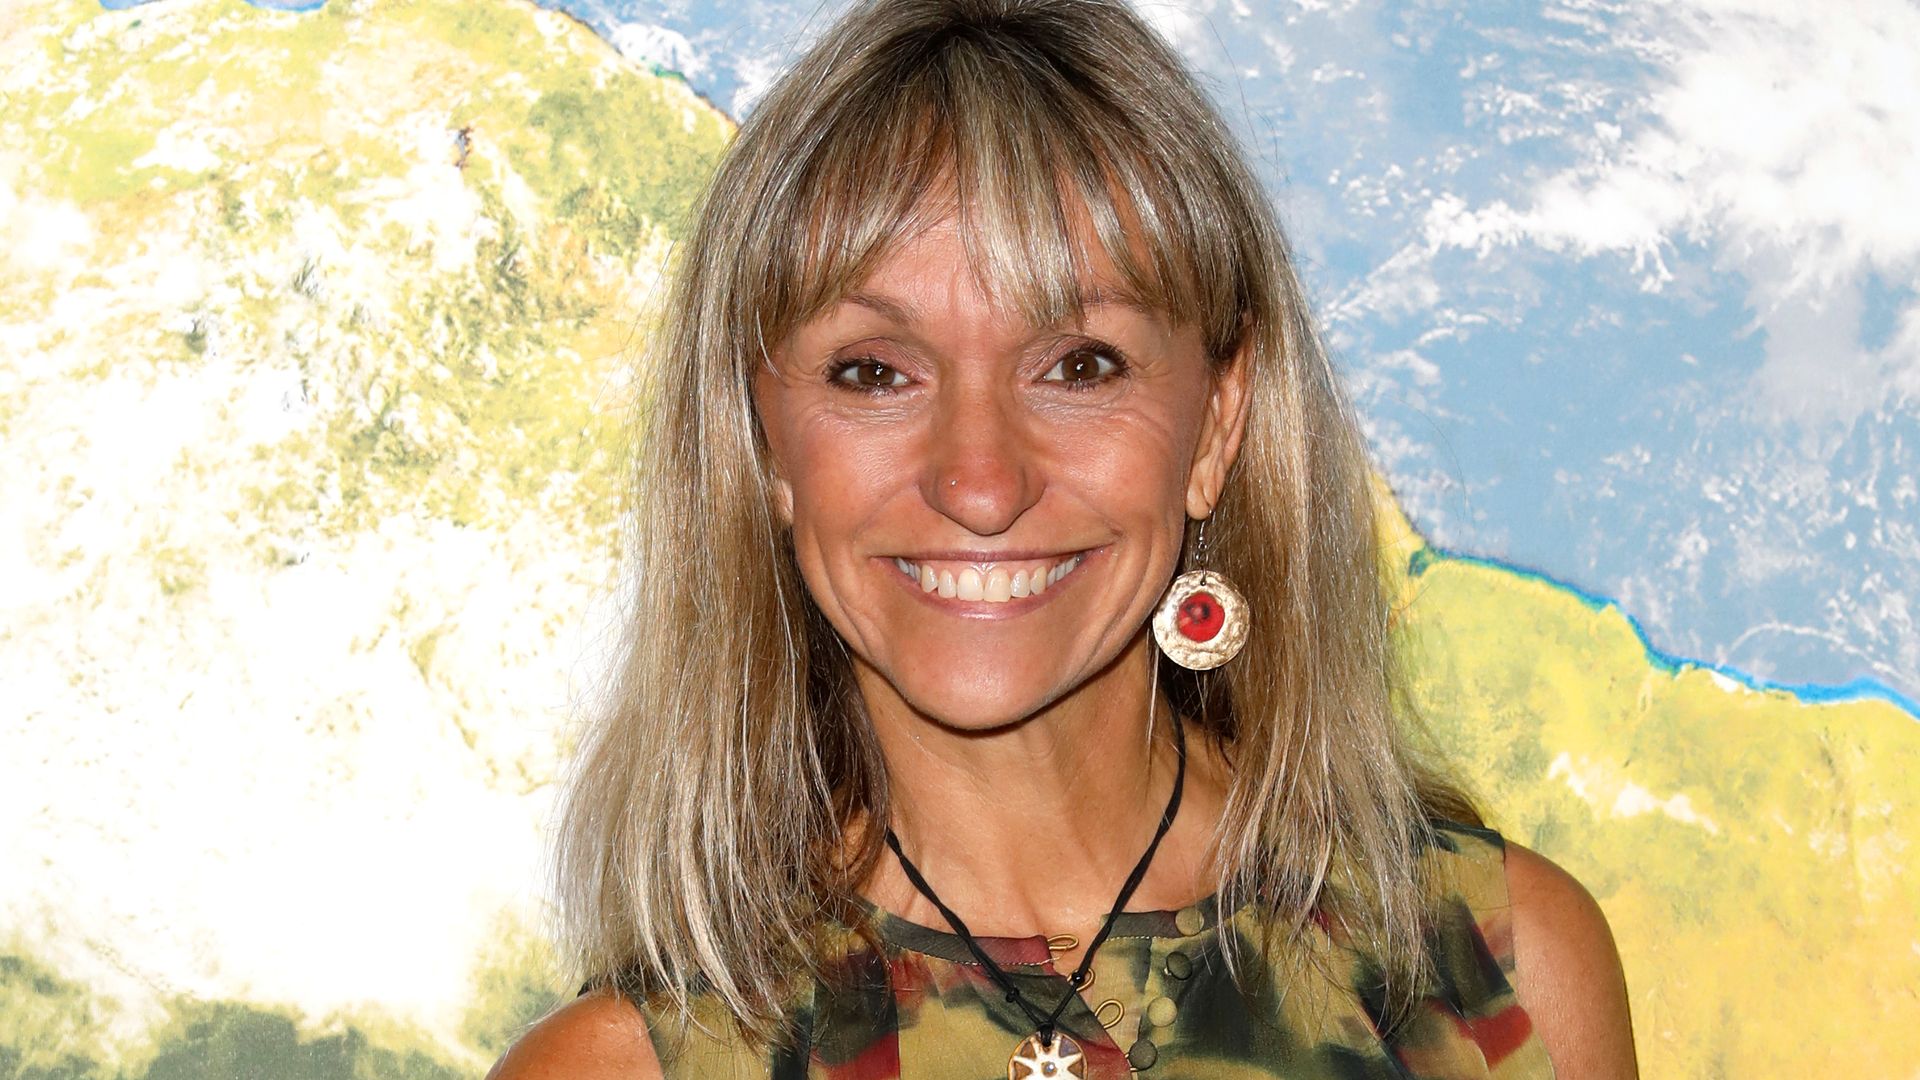 Michaela Strachan attends the "BBC Earth Experience"at Daikin Centre on March 29, 2023